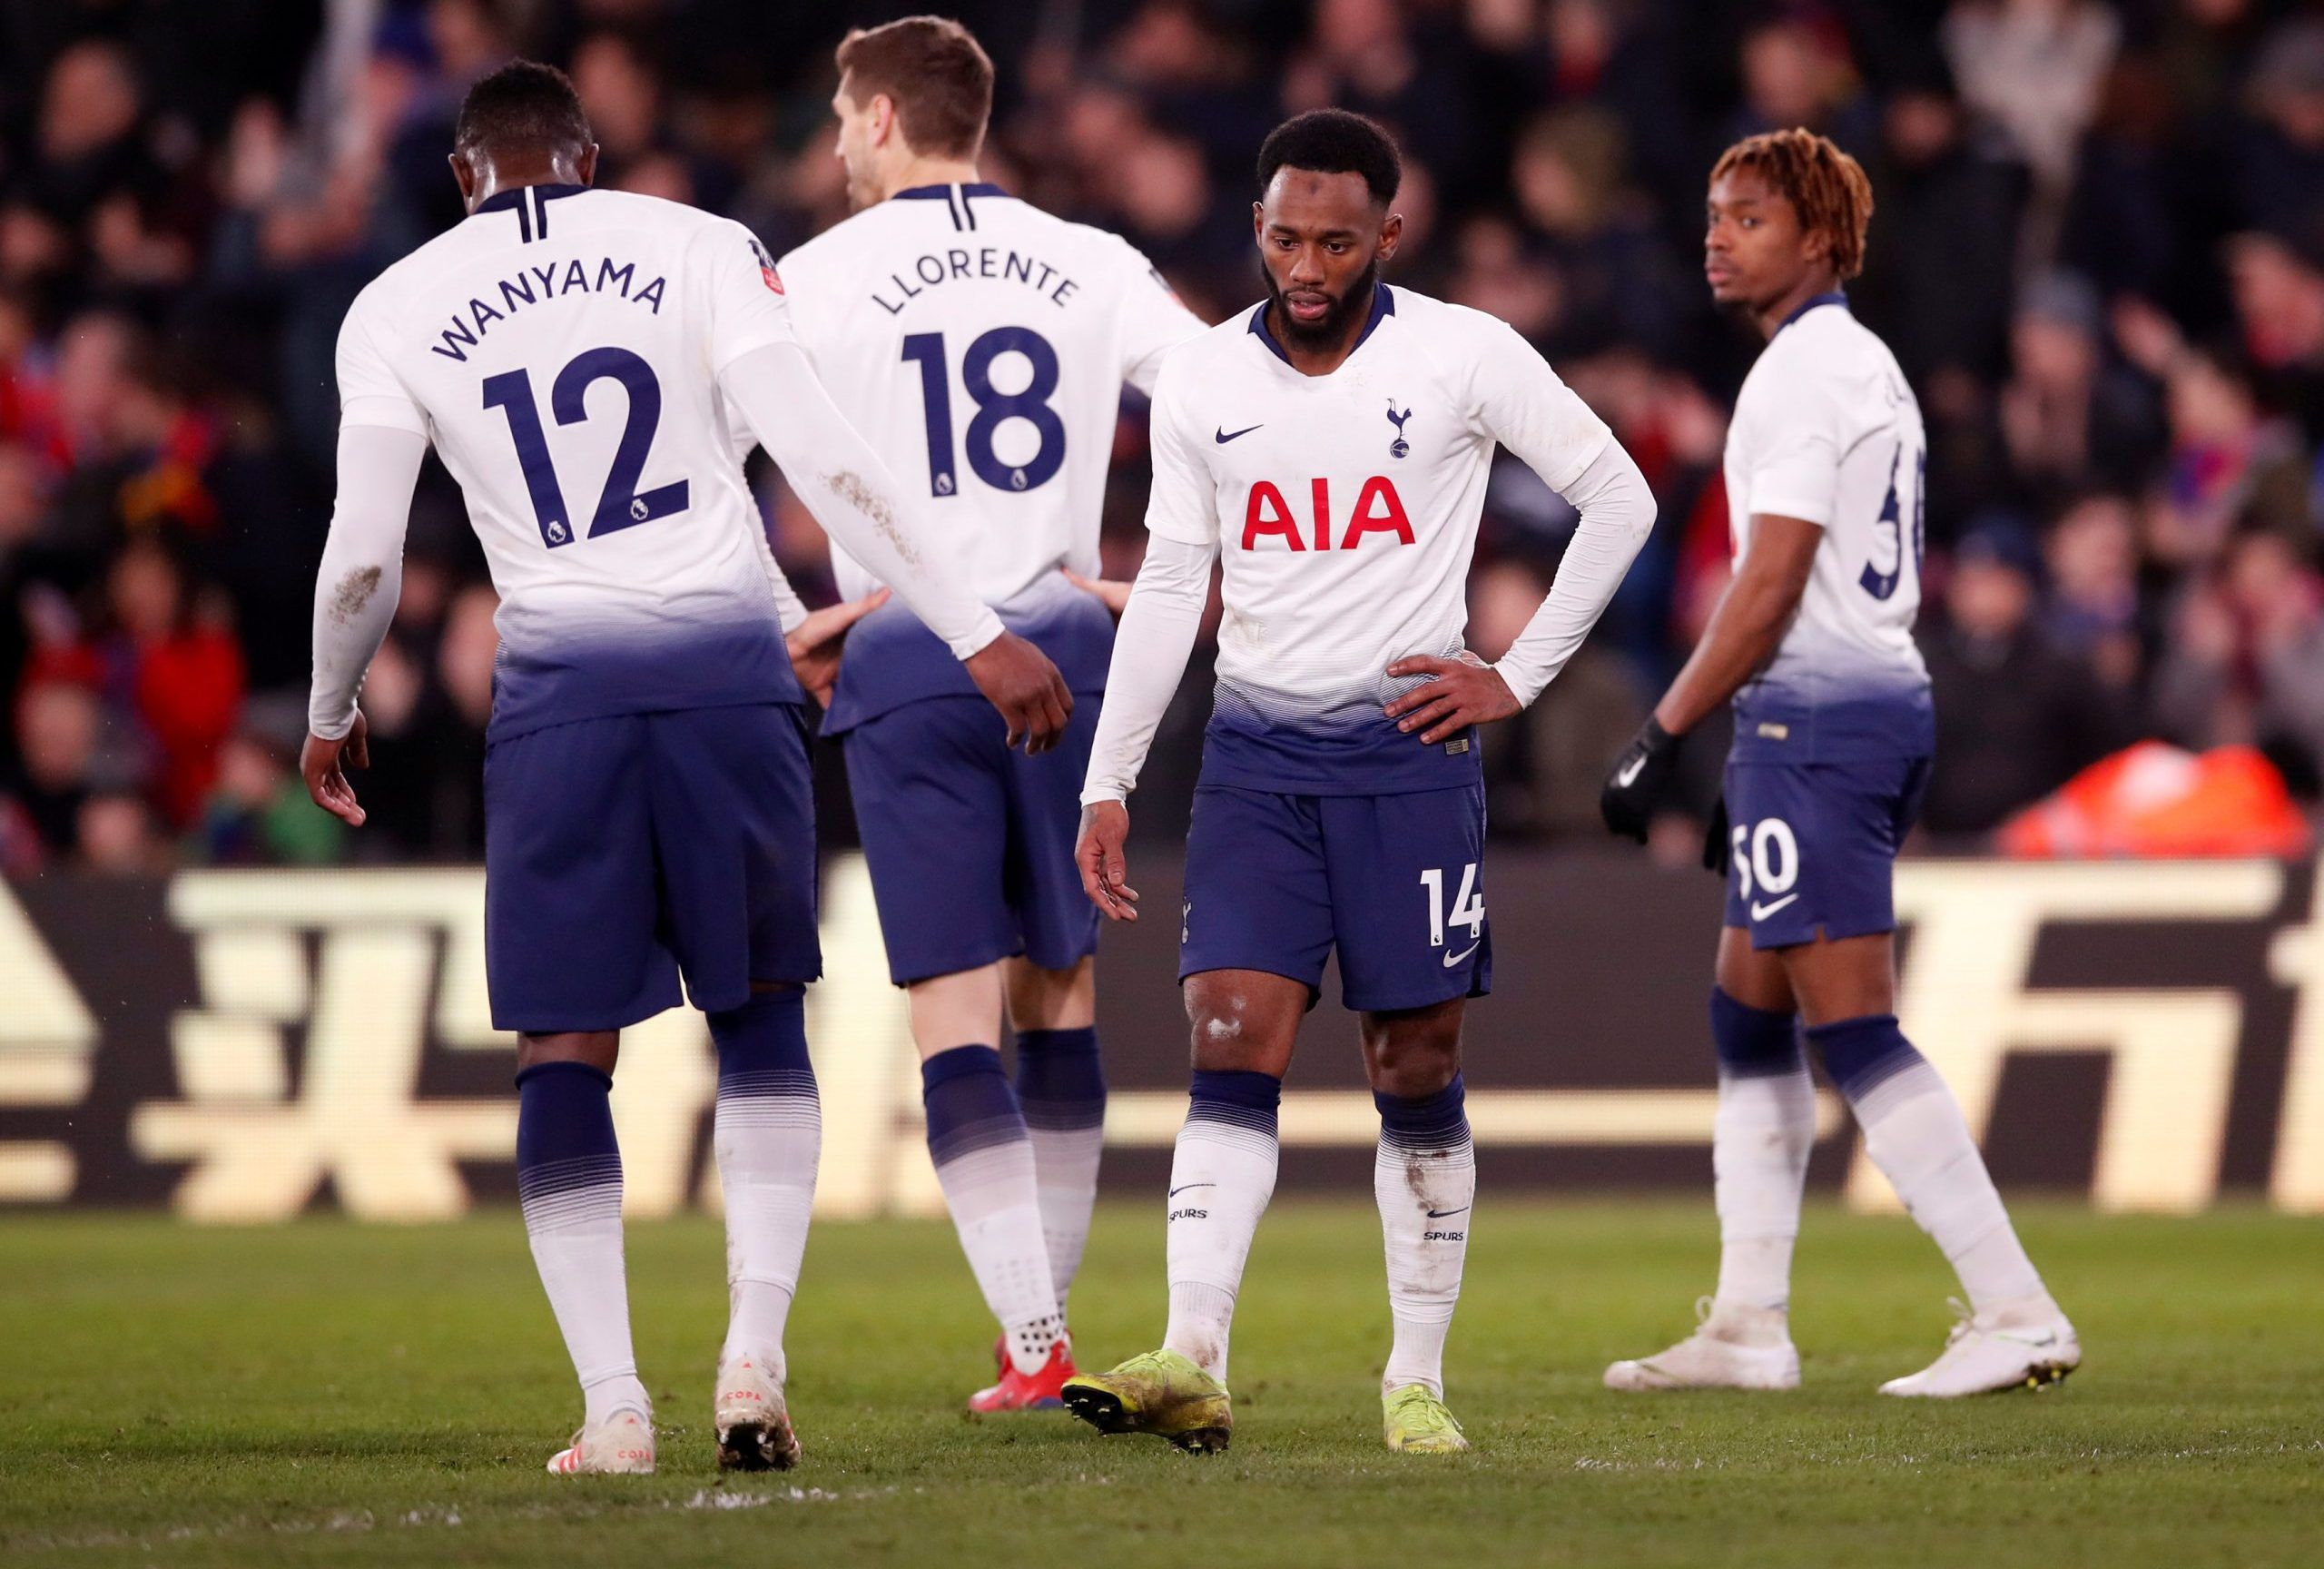 Soccer Football - FA Cup Fourth Round - Crystal Palace v Tottenham Hotspur - Selhurst Park, London, Britain - January 27, 2019  Tottenham's Georges-Kevin N'Koudou, Kazaiah Sterling and team mates react after the match   REUTERS/David Klein